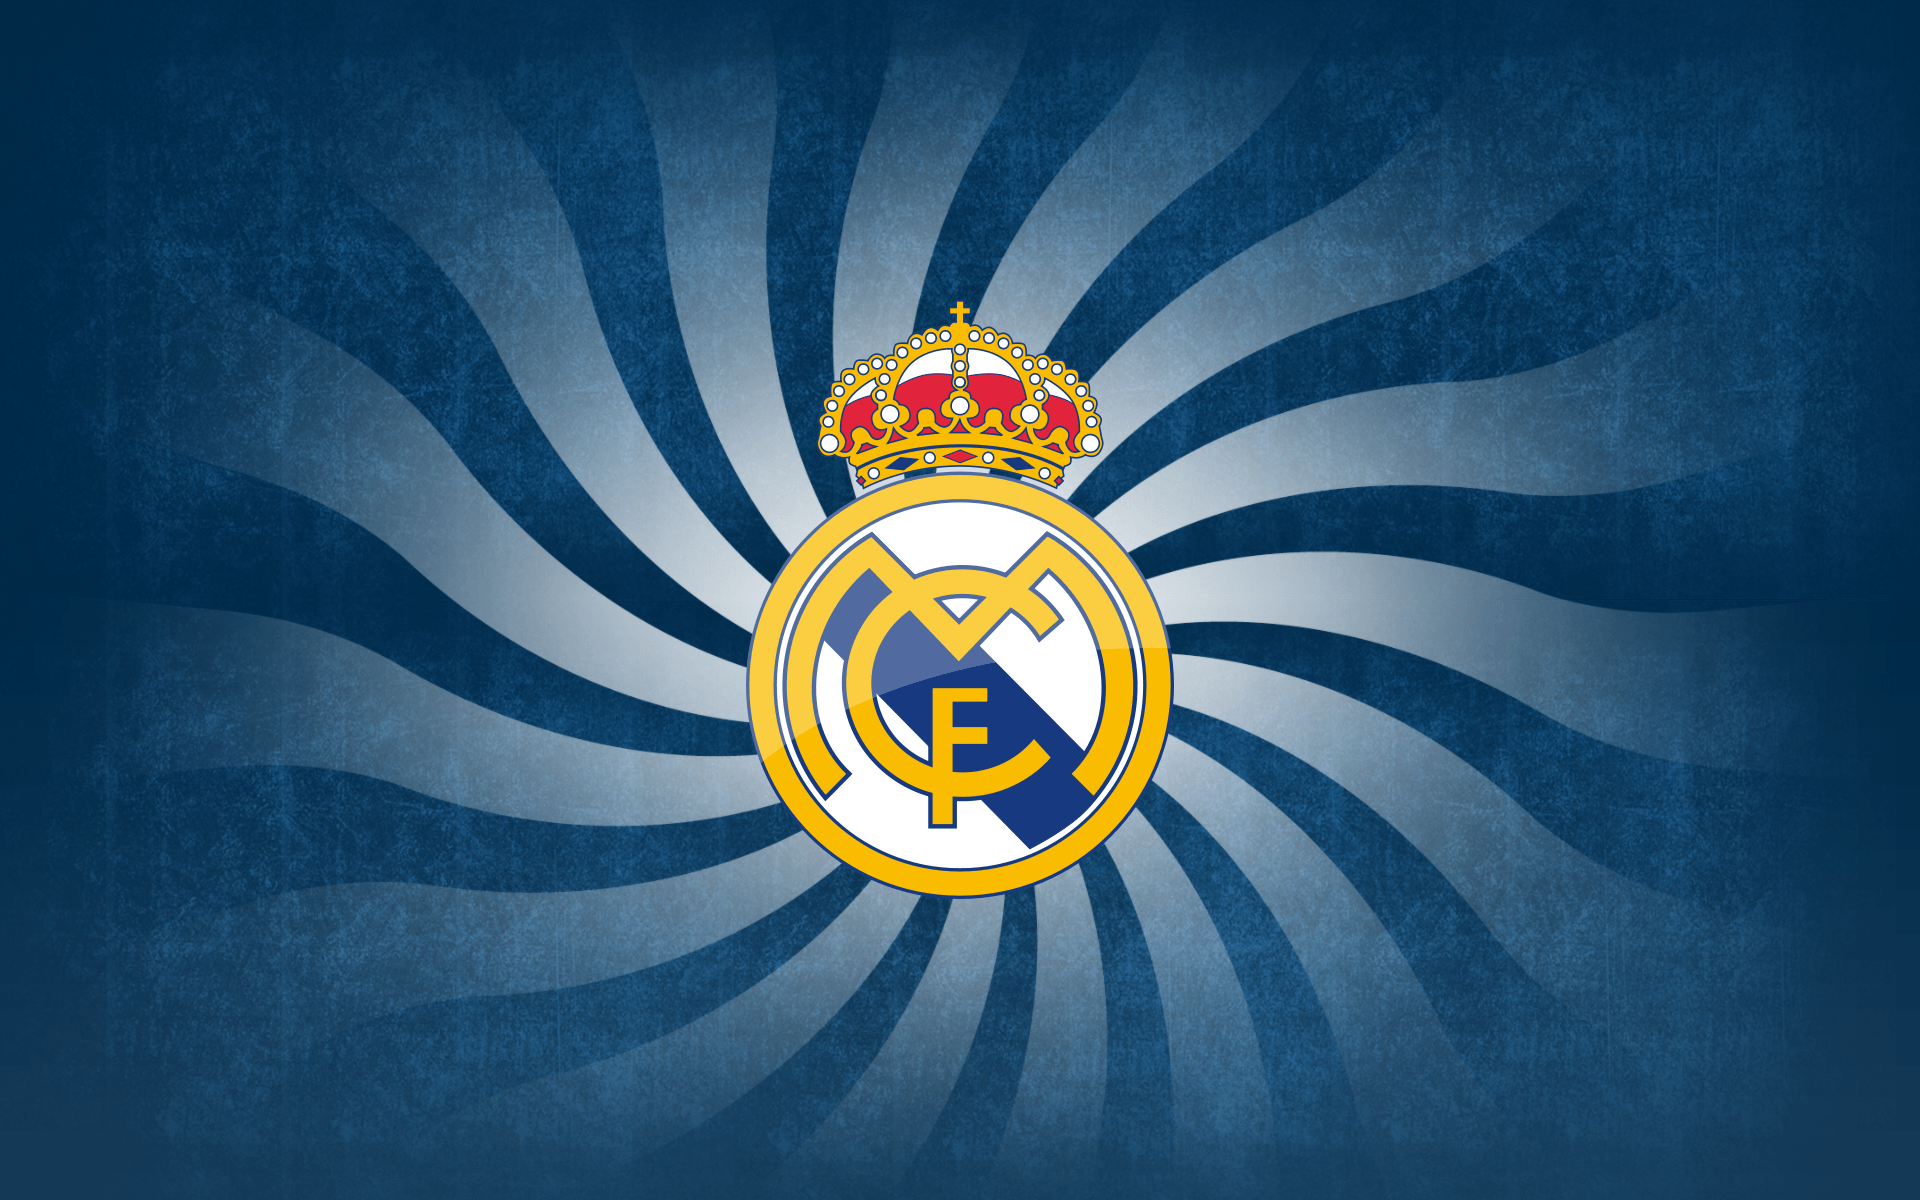 UEFA Champions League 2023 Real Madrid flag with a soccer ball in net  UEFA Wallpaper 3D work and 3D image Yerevan Armenia  2023 january 26  Stock Photo  Alamy